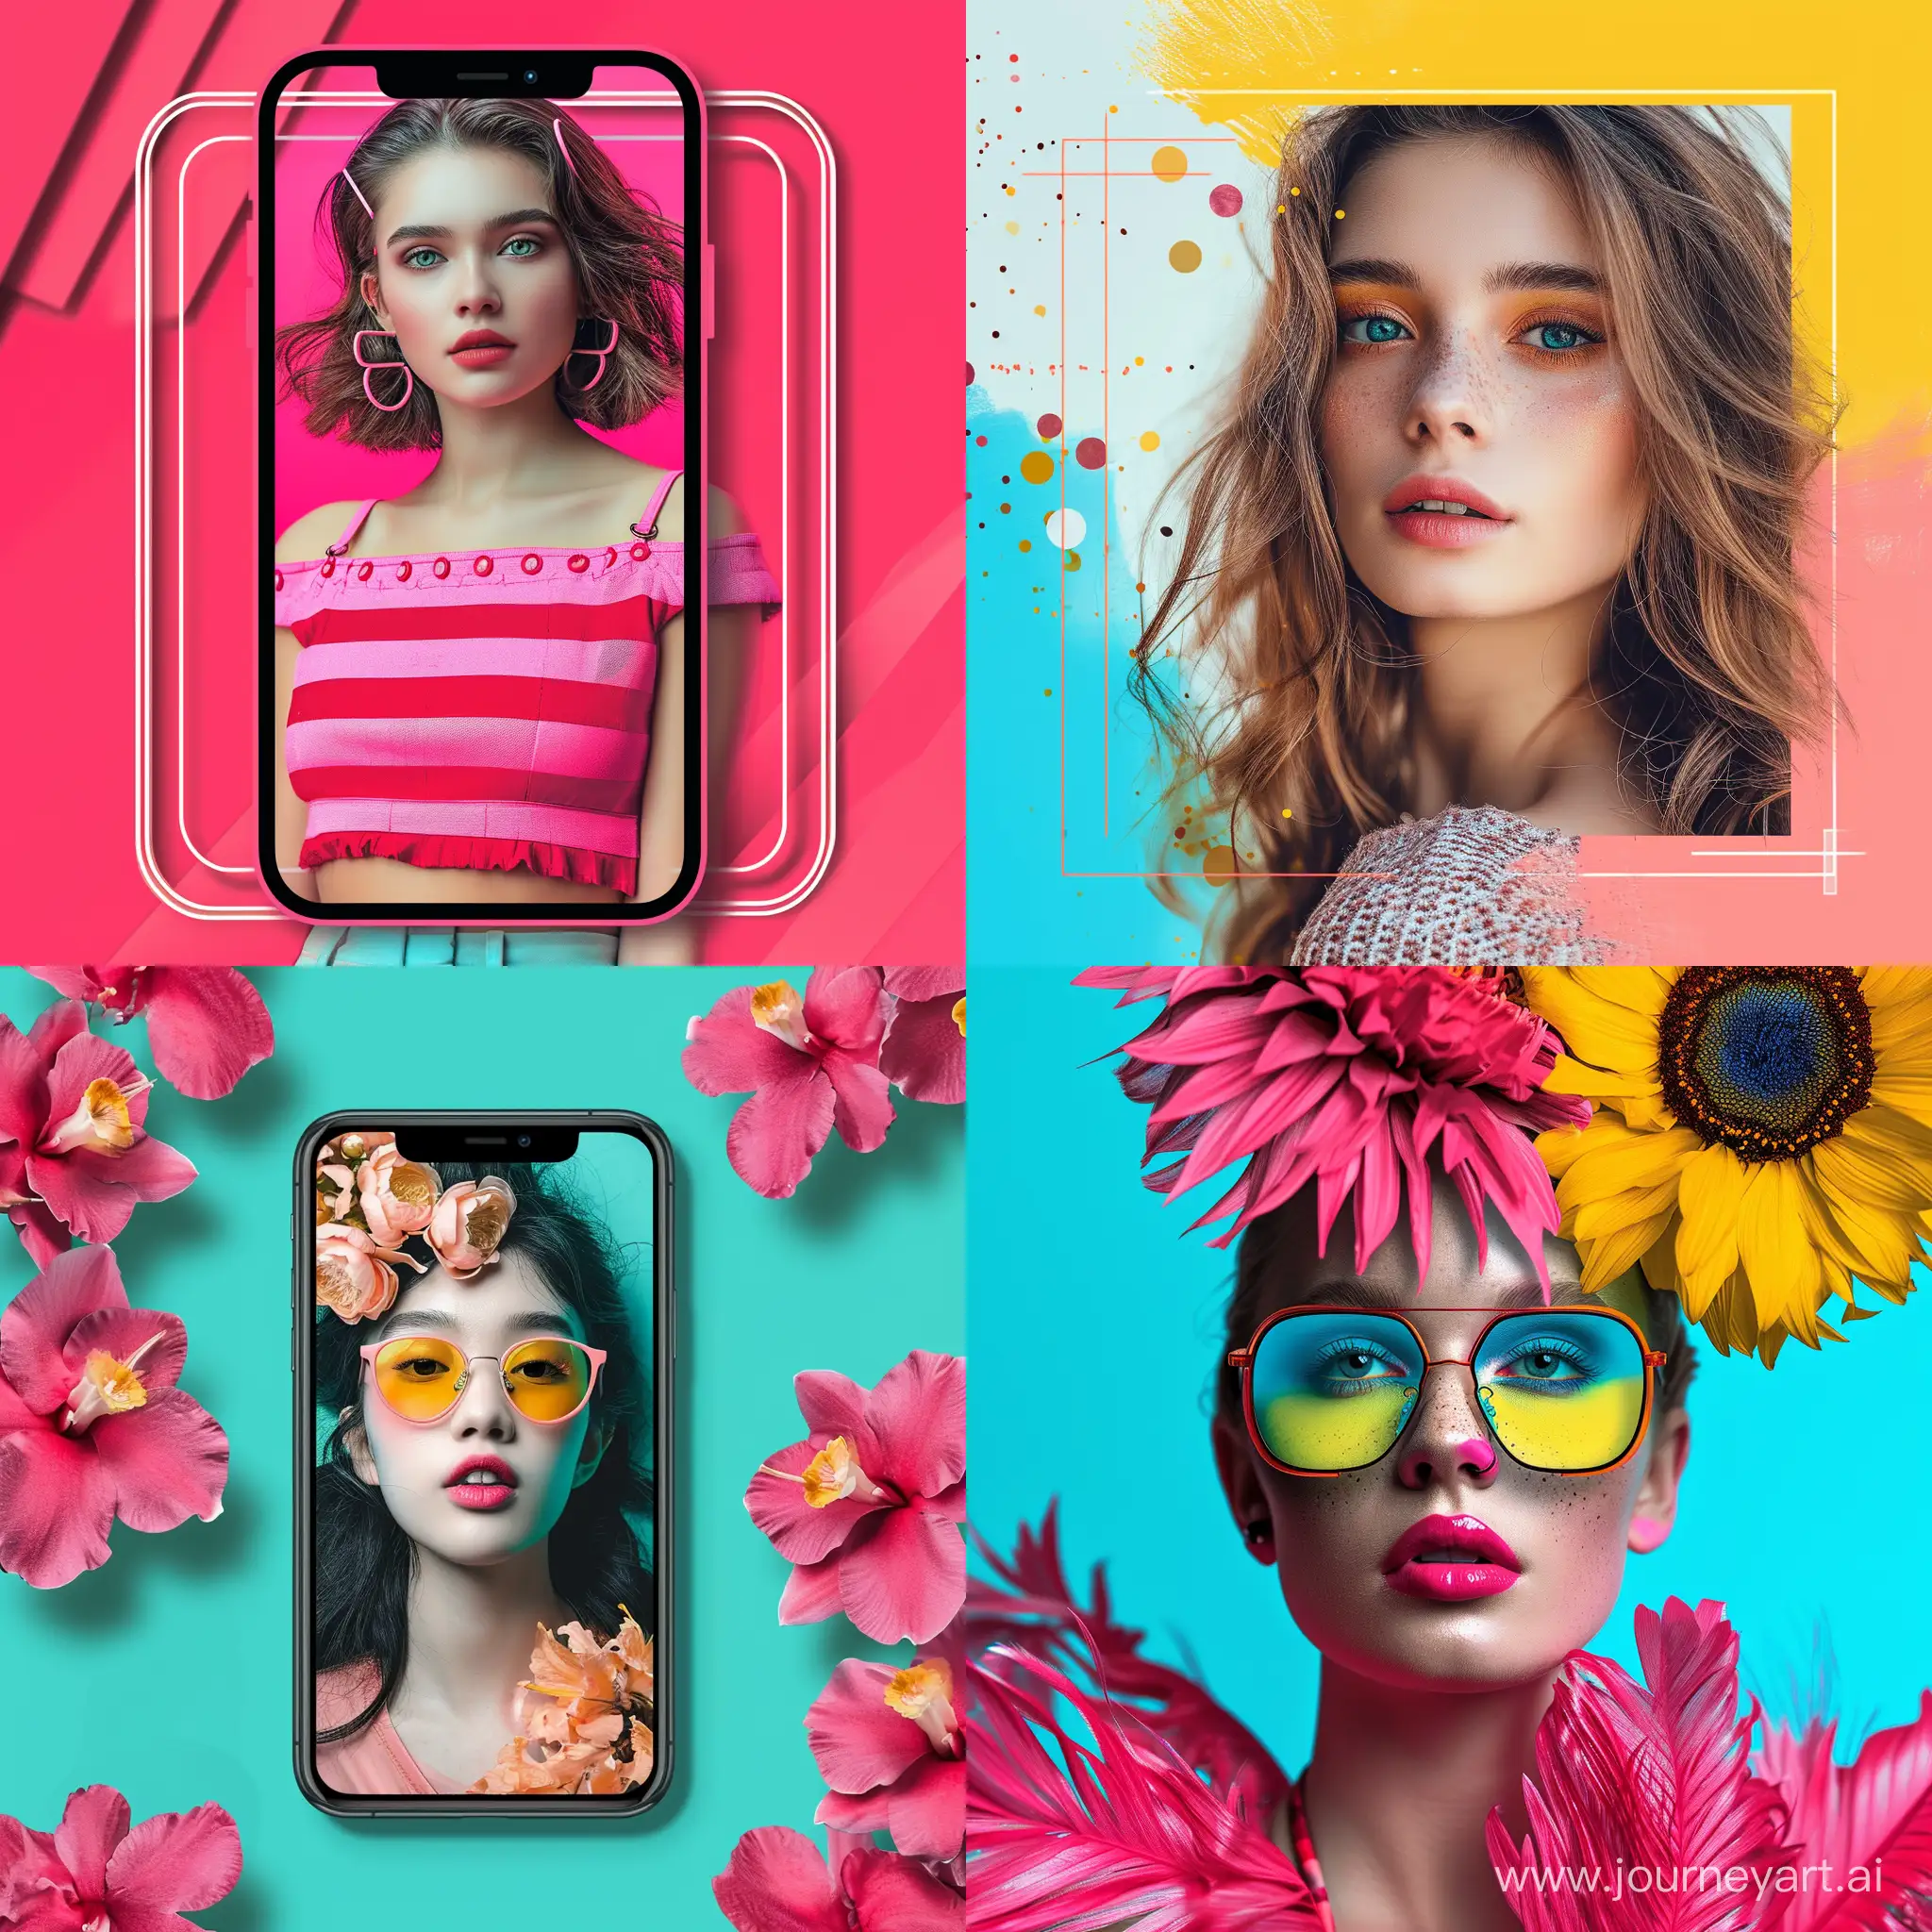 Creative-Instagram-Cover-Designs-and-Stunning-Photo-Edits-Version-6